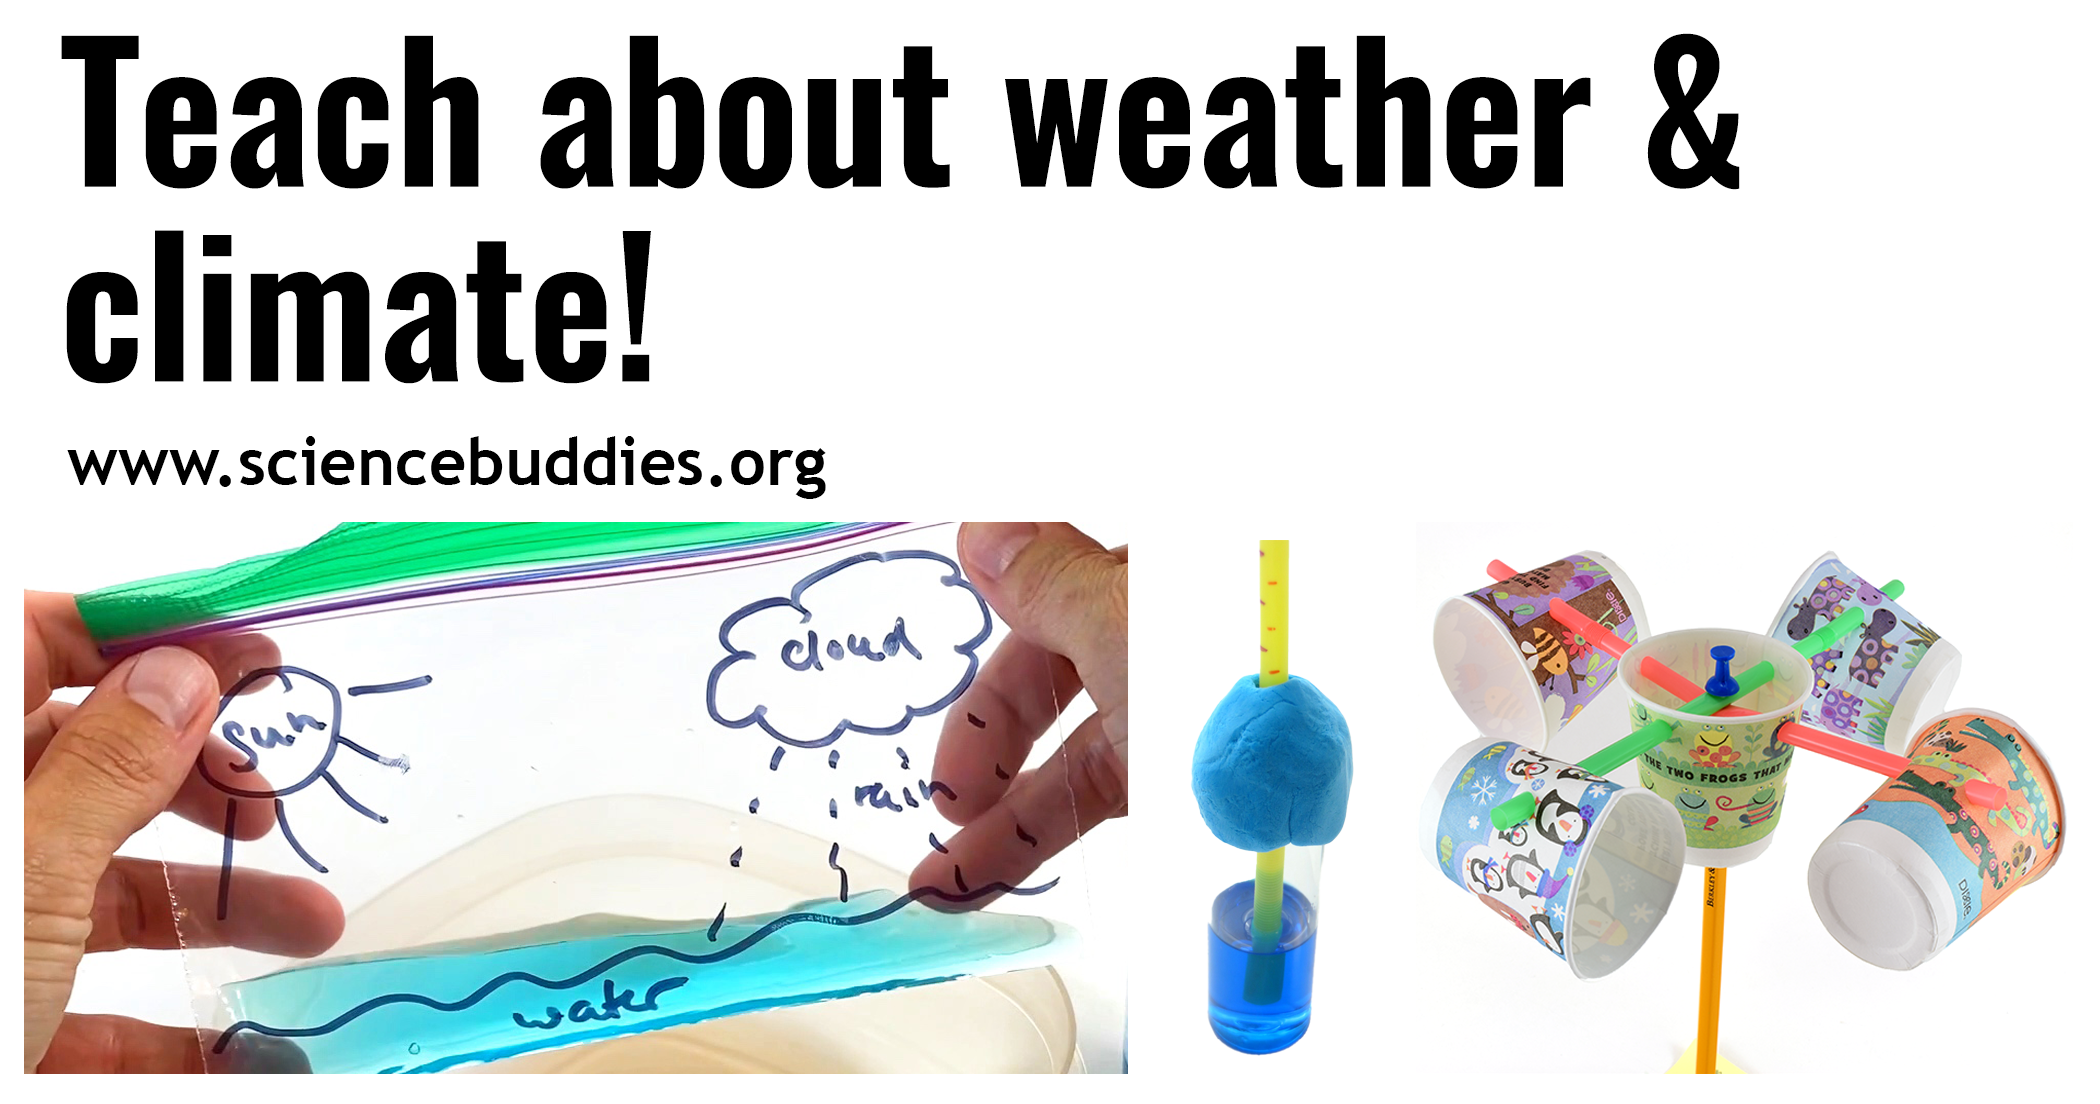 Climate Change Science Kit Wild Weather System Experiments Learn Educate STEM 